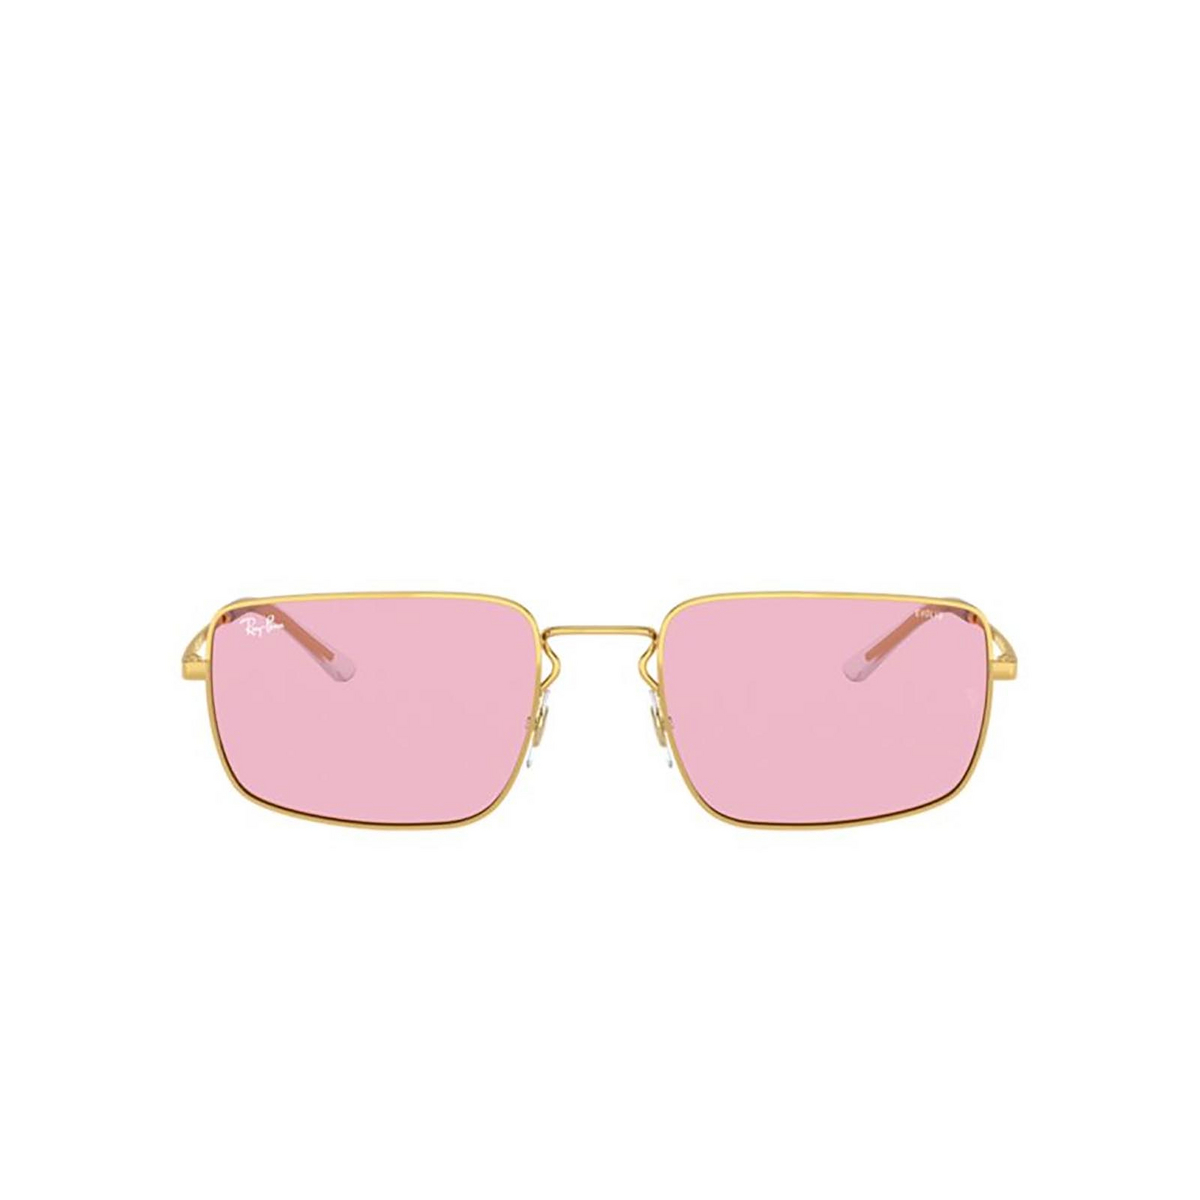 Ray-Ban® Sunglasses: RB3669 color Arista 001/Q3 - front view.